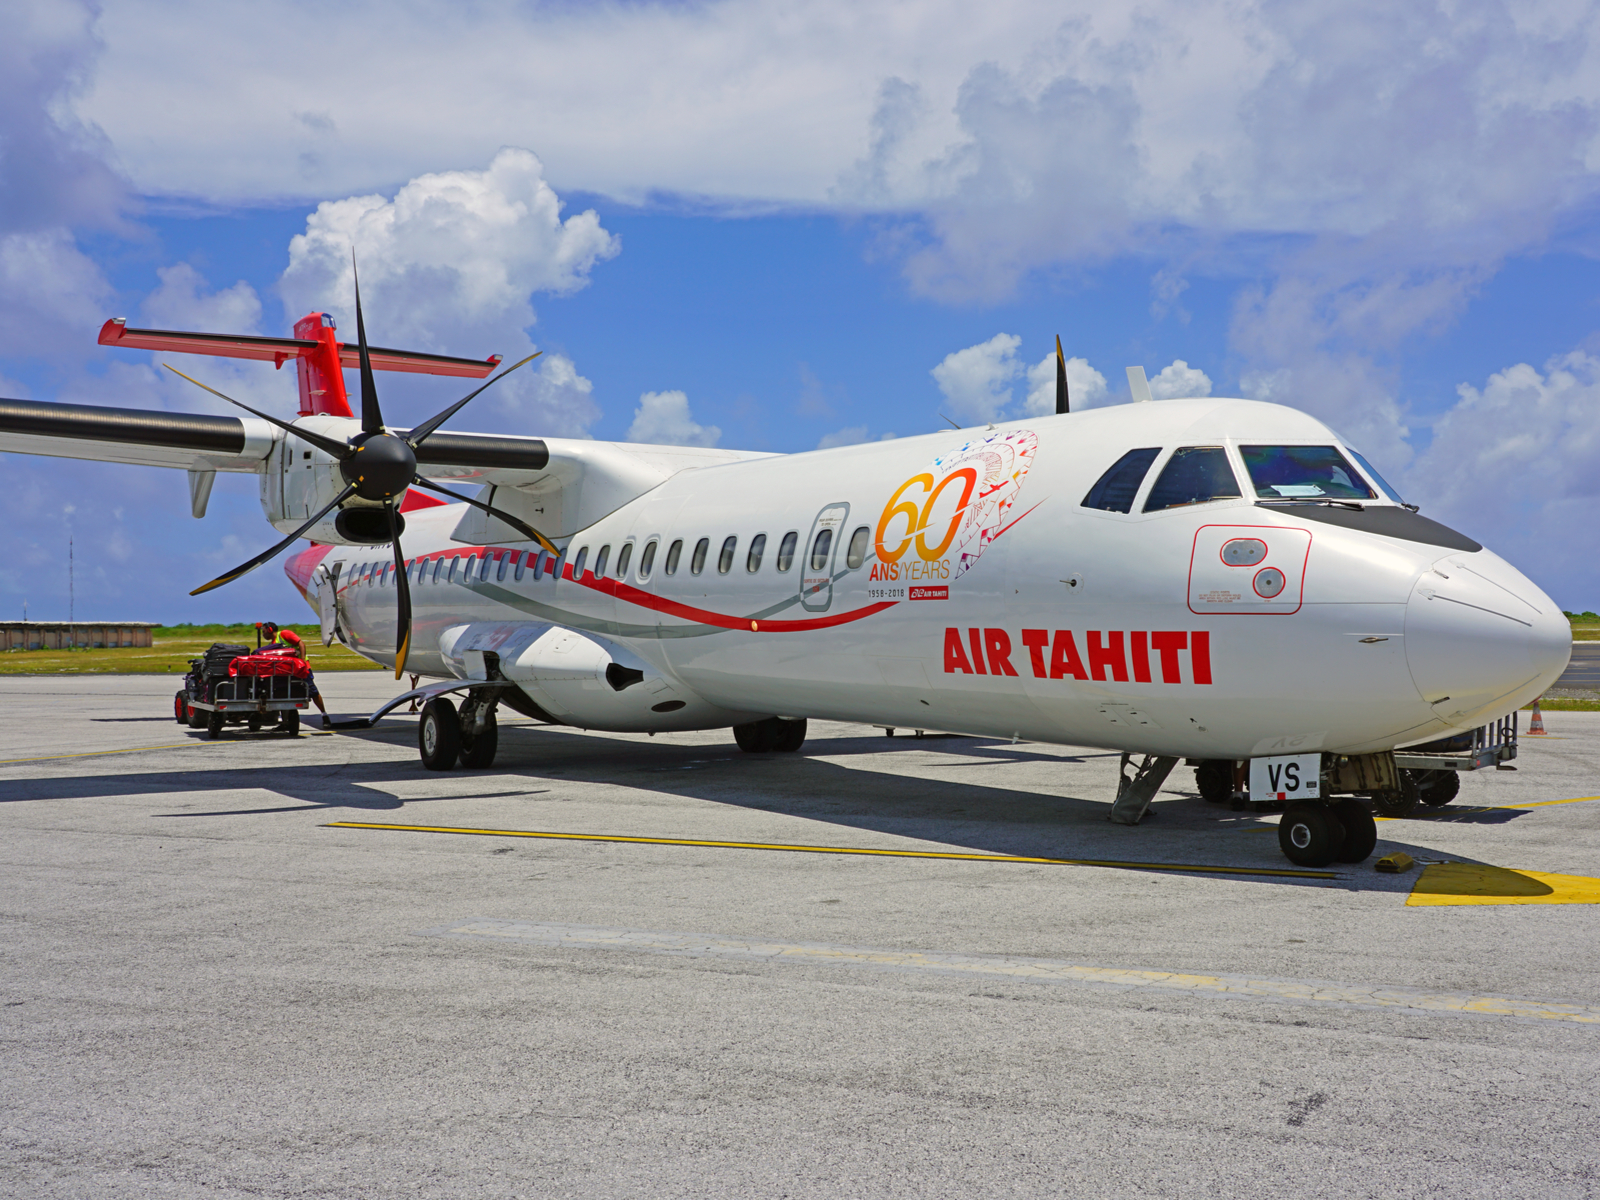 ATR regional airplane on the ramp on a sunny day during the best time to visit Tahiti